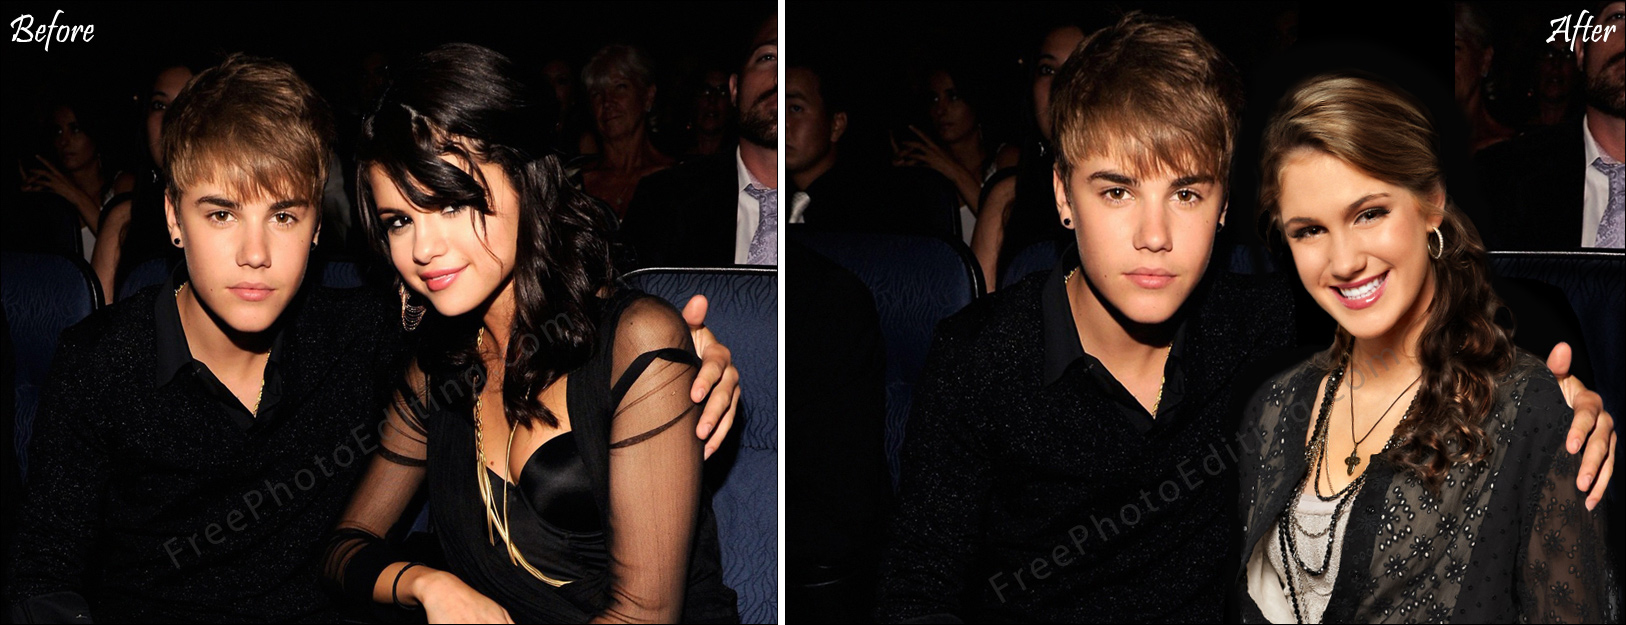 Shannon Magrane replaces Selena Gomez by Justin Bieber's side. See original photo above.